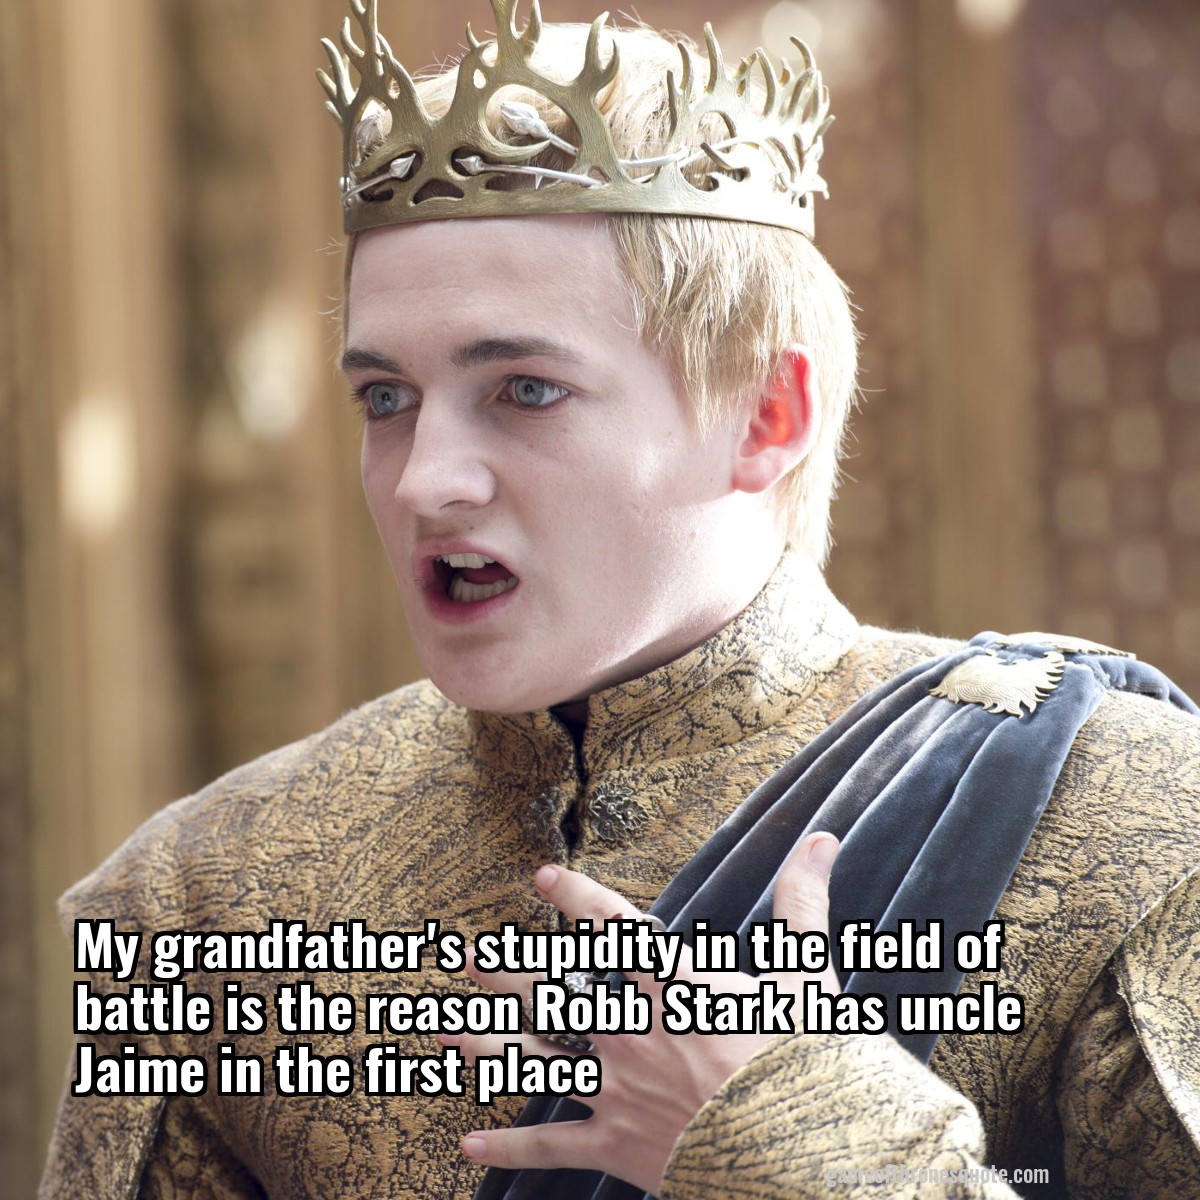 My grandfather's stupidity in the field of battle is the reason Robb Stark has uncle Jaime in the first place